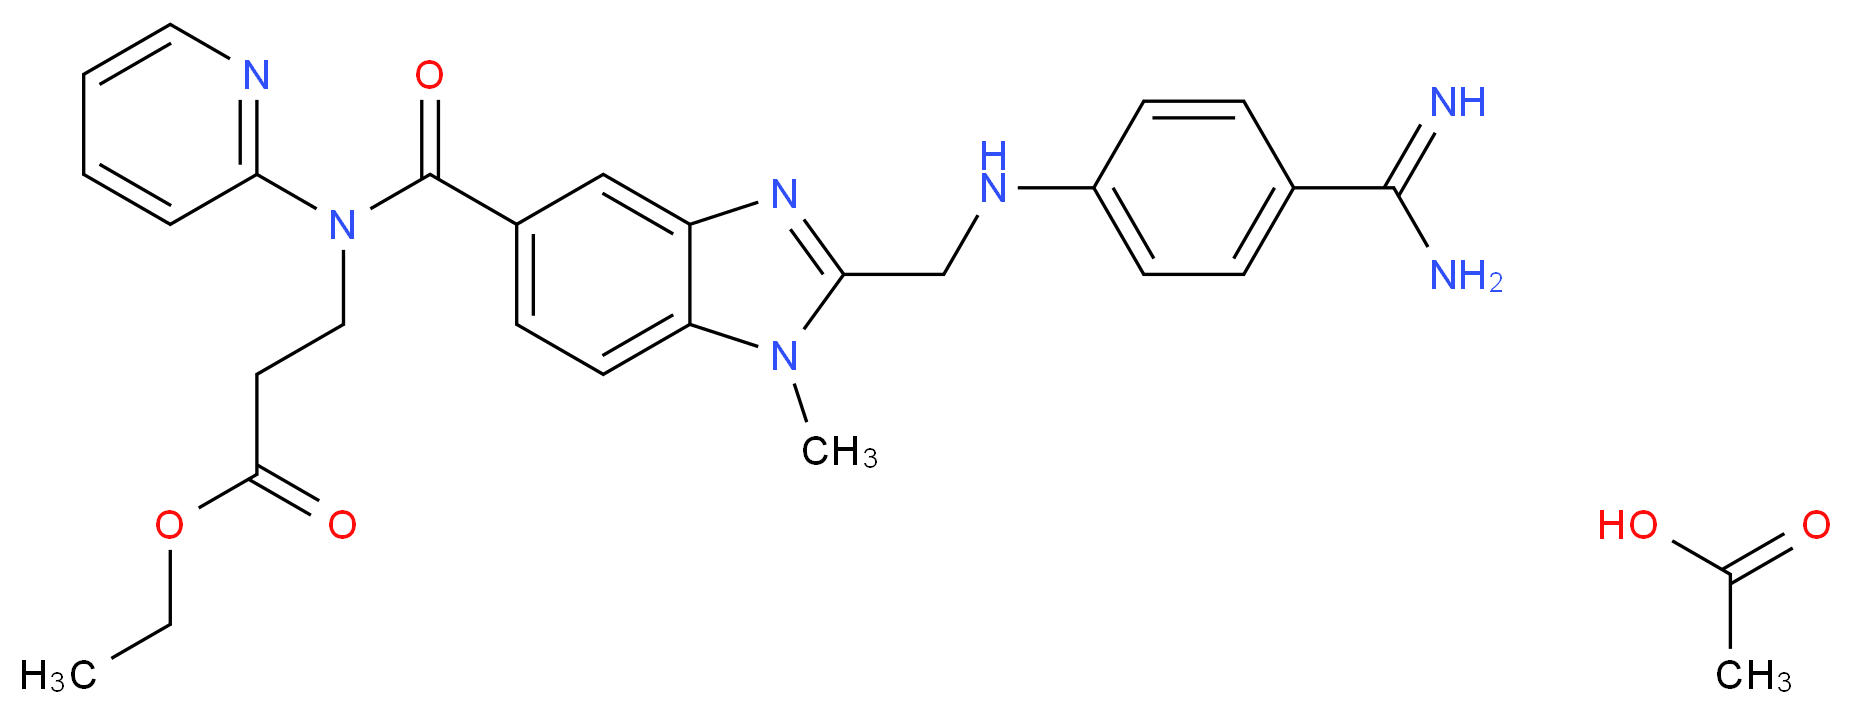 Ethyl 3-(2-(((4-carbamimidoylphenyl)amino)methyl)-1-methyl-N-(pyridin-2-yl)-1H-benzo[d]imidazole-5-carboxamido)propanoate acetate_Molecular_structure_CAS_1188263-64-0)